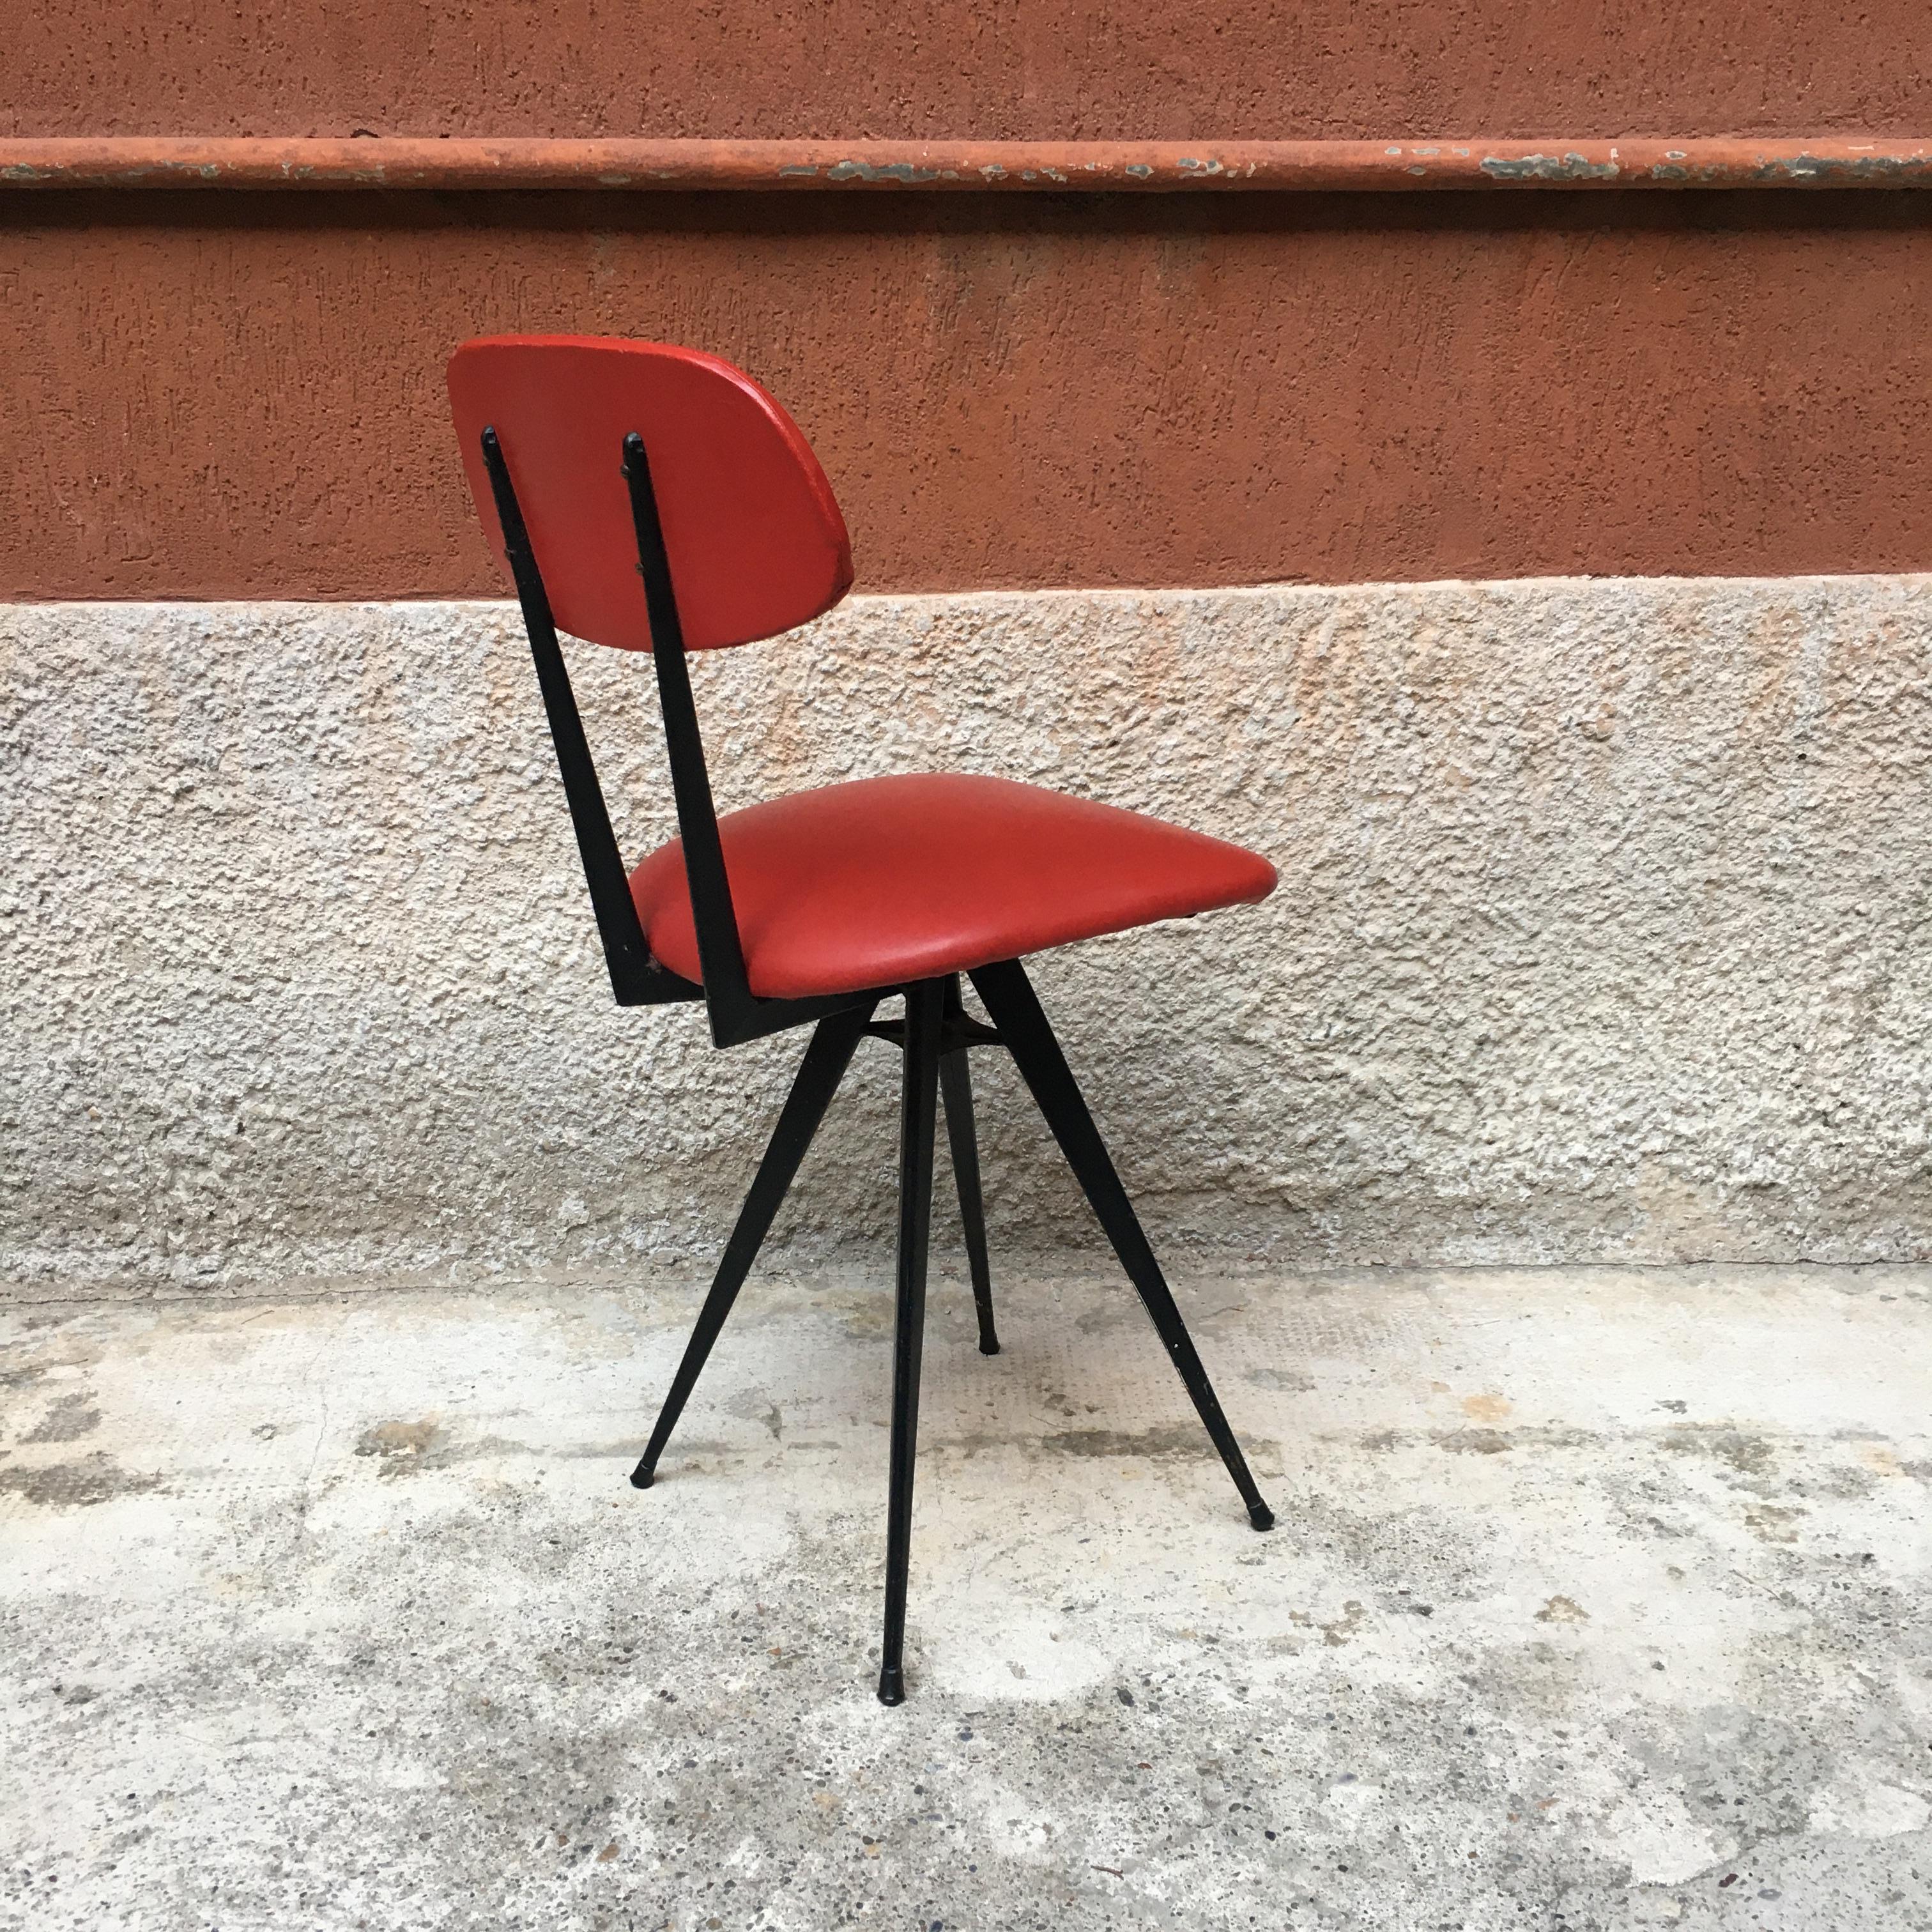 Italian Red Leatherette and Metal Legs Chairs, 1960s (Moderne der Mitte des Jahrhunderts)